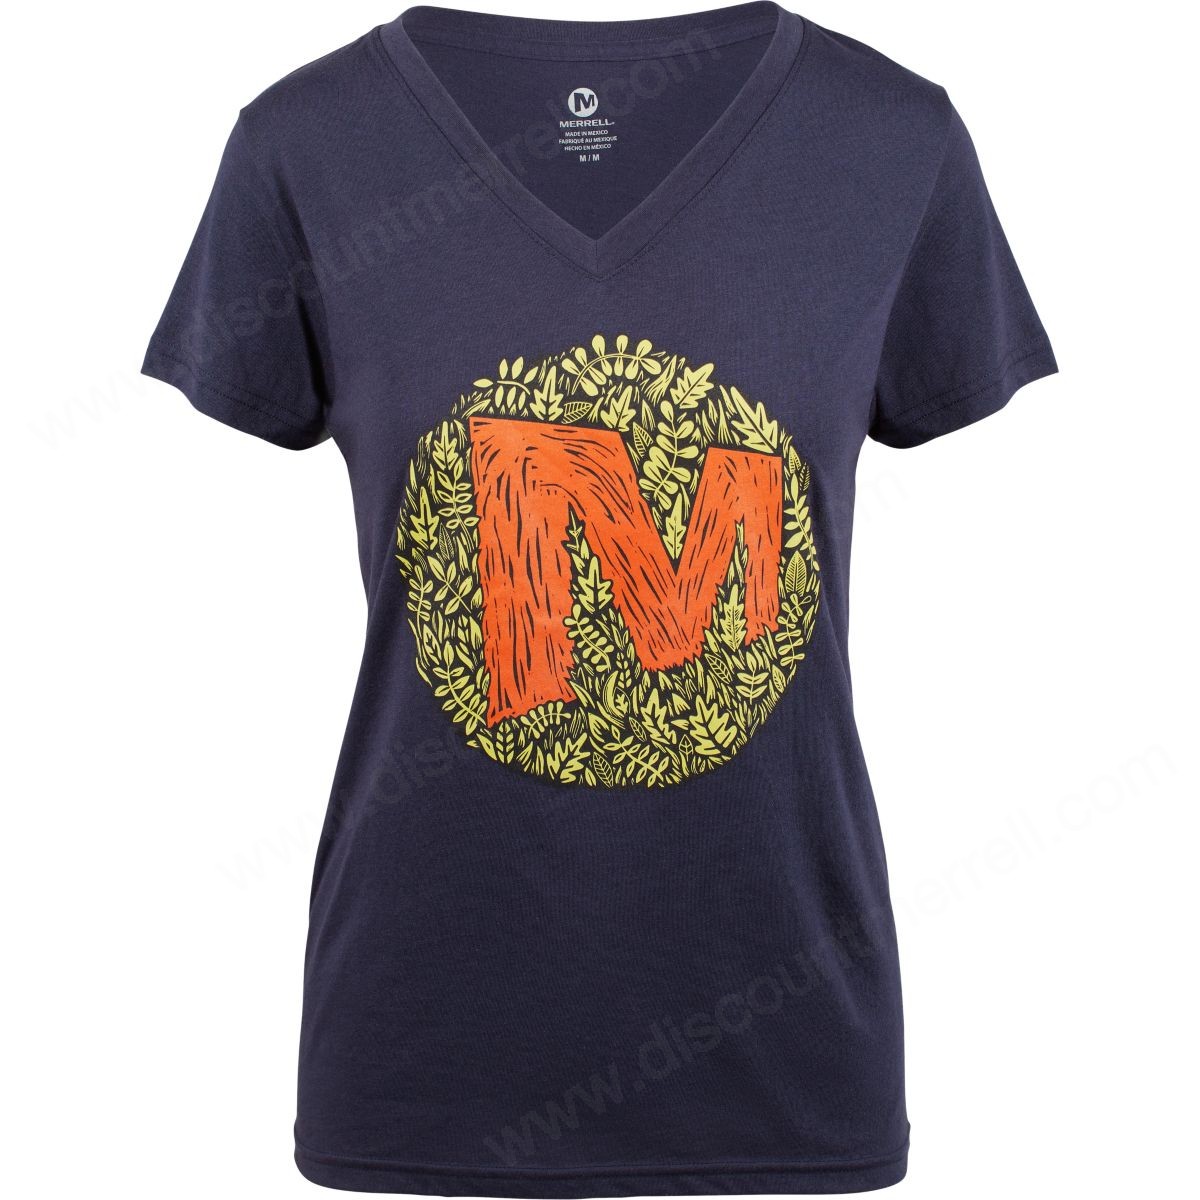 Merrell Lady's Merrell Forest T-Shirts Navy - Merrell Lady's Merrell Forest T-Shirts Navy